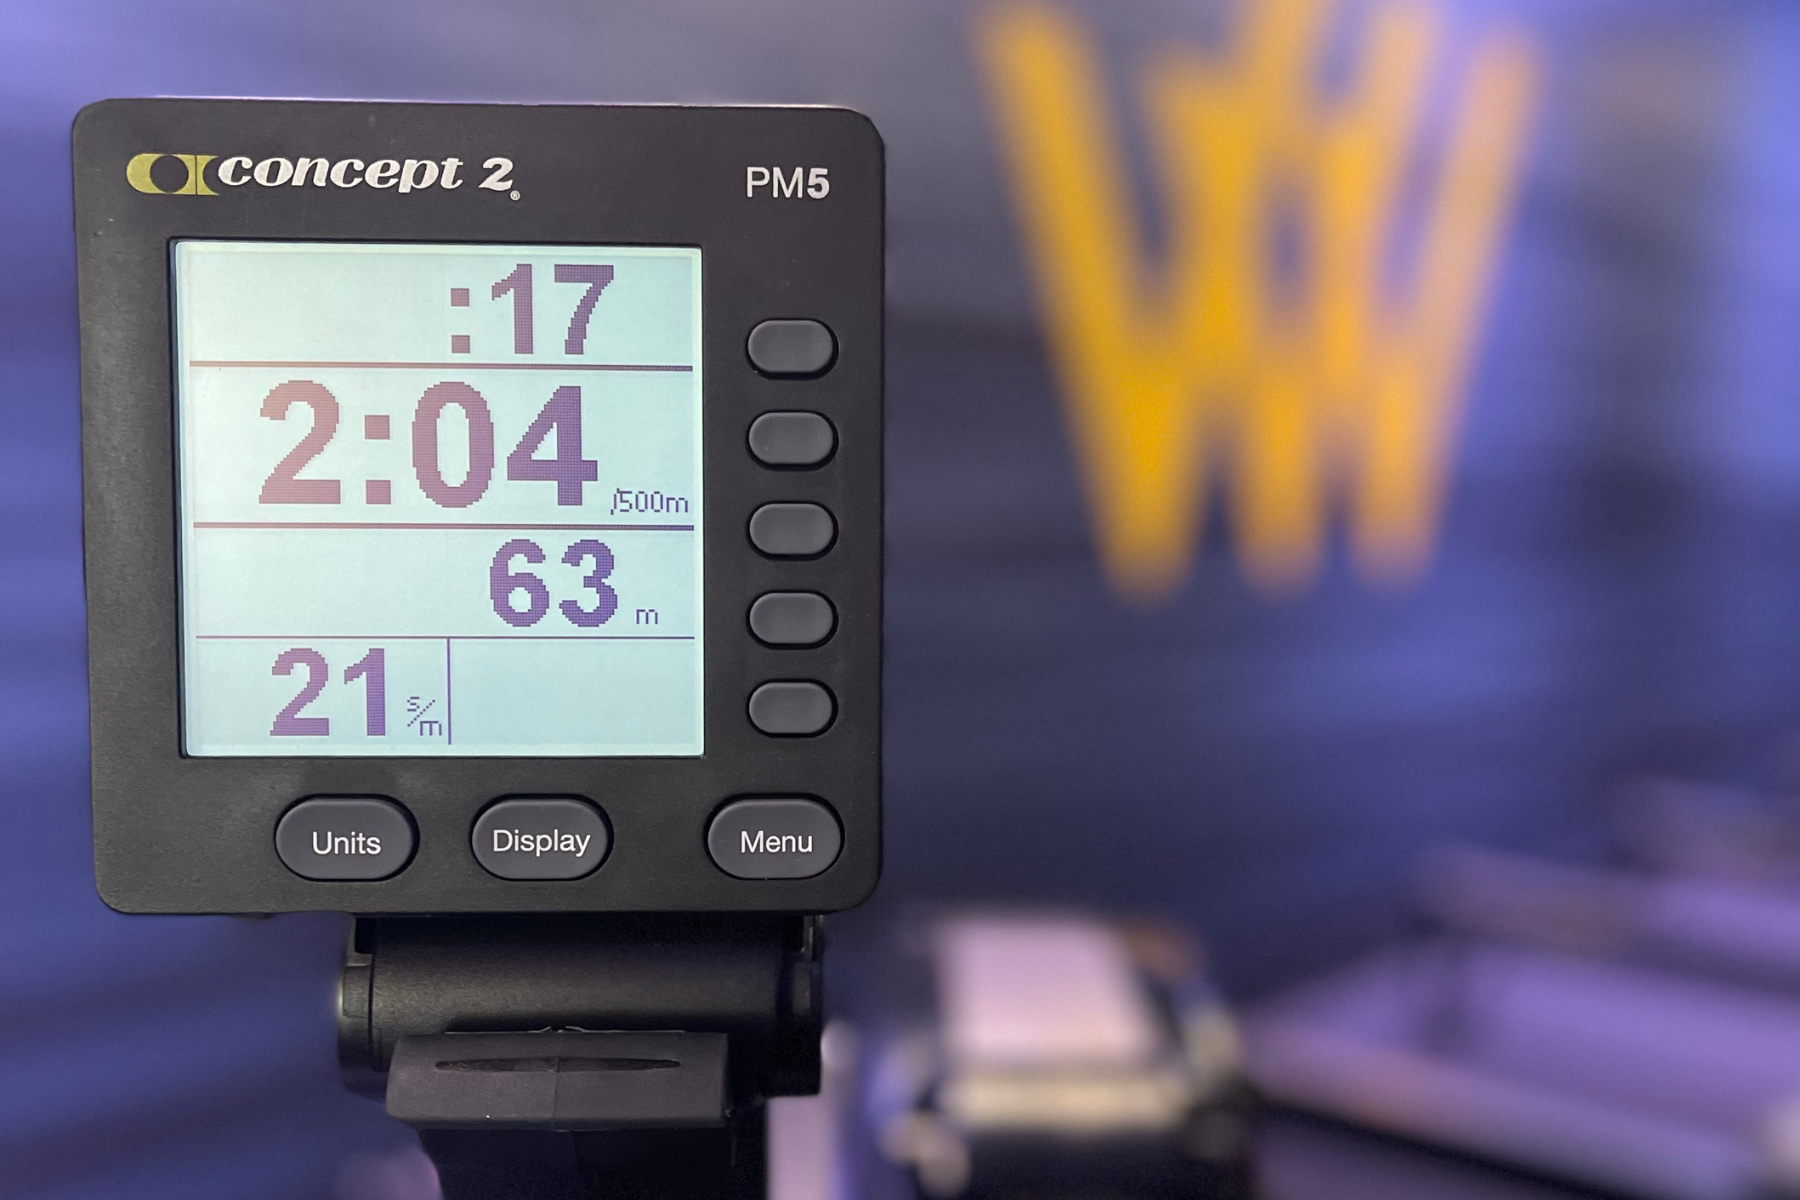 What Do Your Concept2 Rowing Machine Stats Mean?